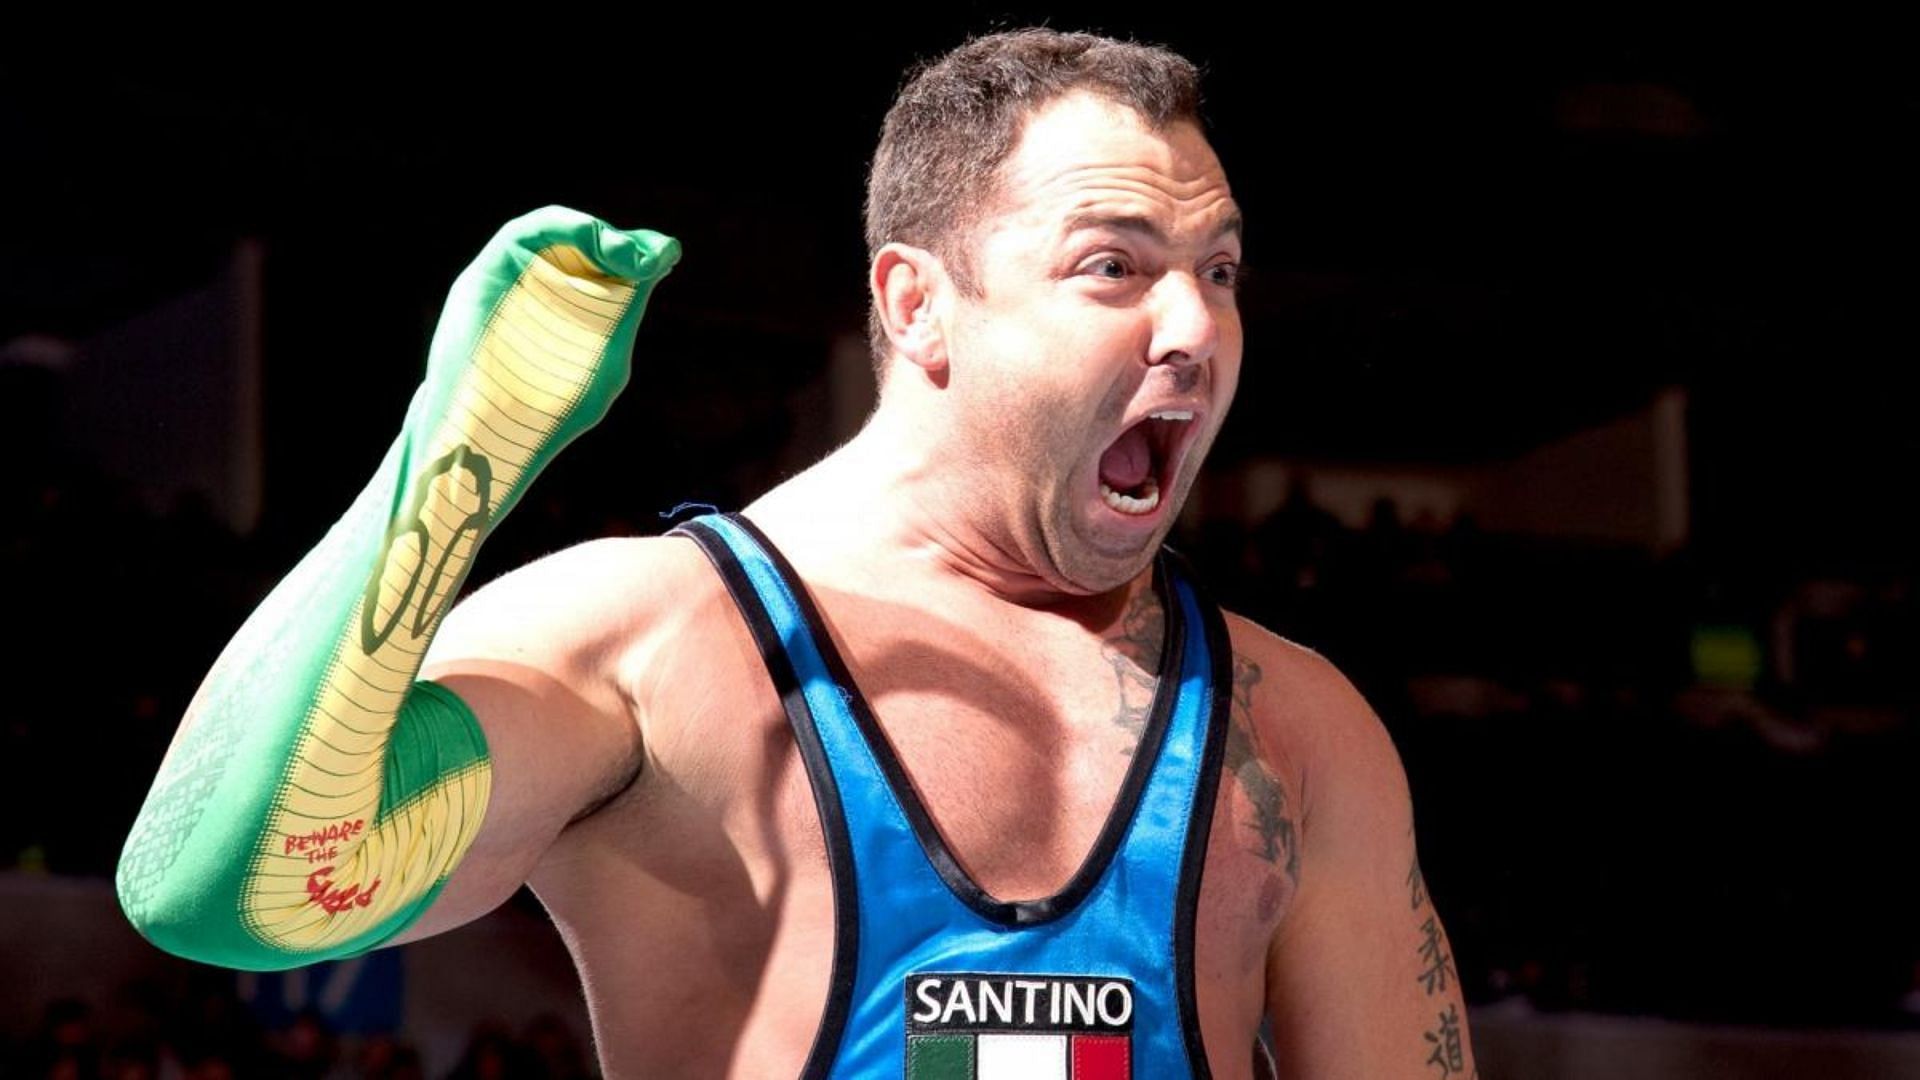 Santino wants to commentate for WWE